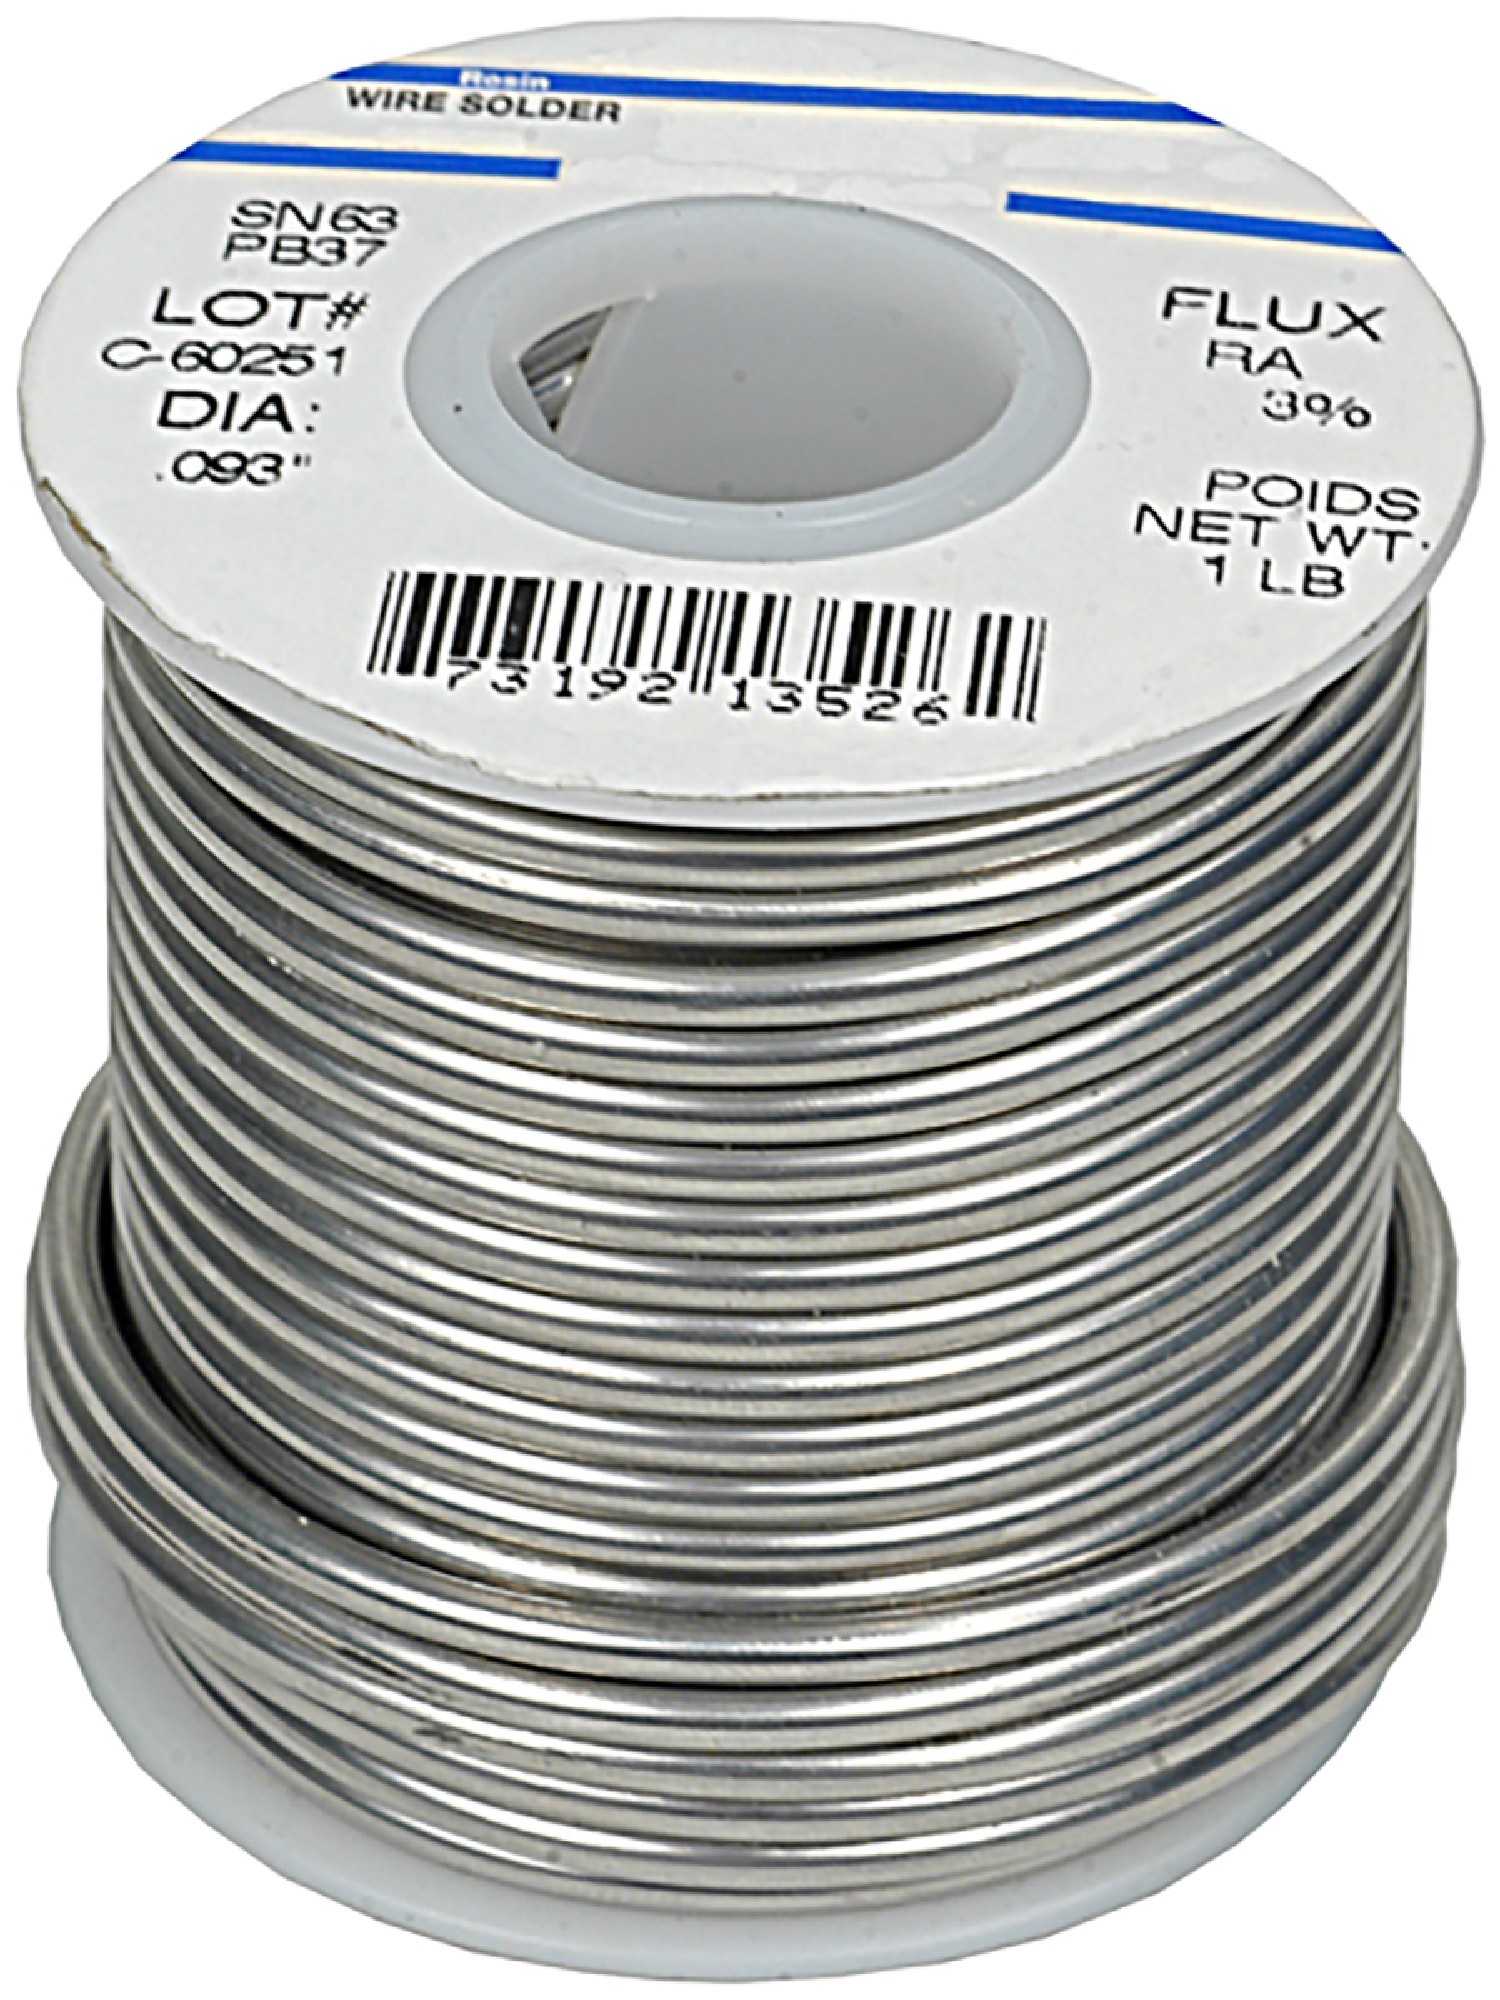 DB Electrical New 900-20017 Solder, 60/40; 0.093 Wire Diameter; 1lb Spool for Universal